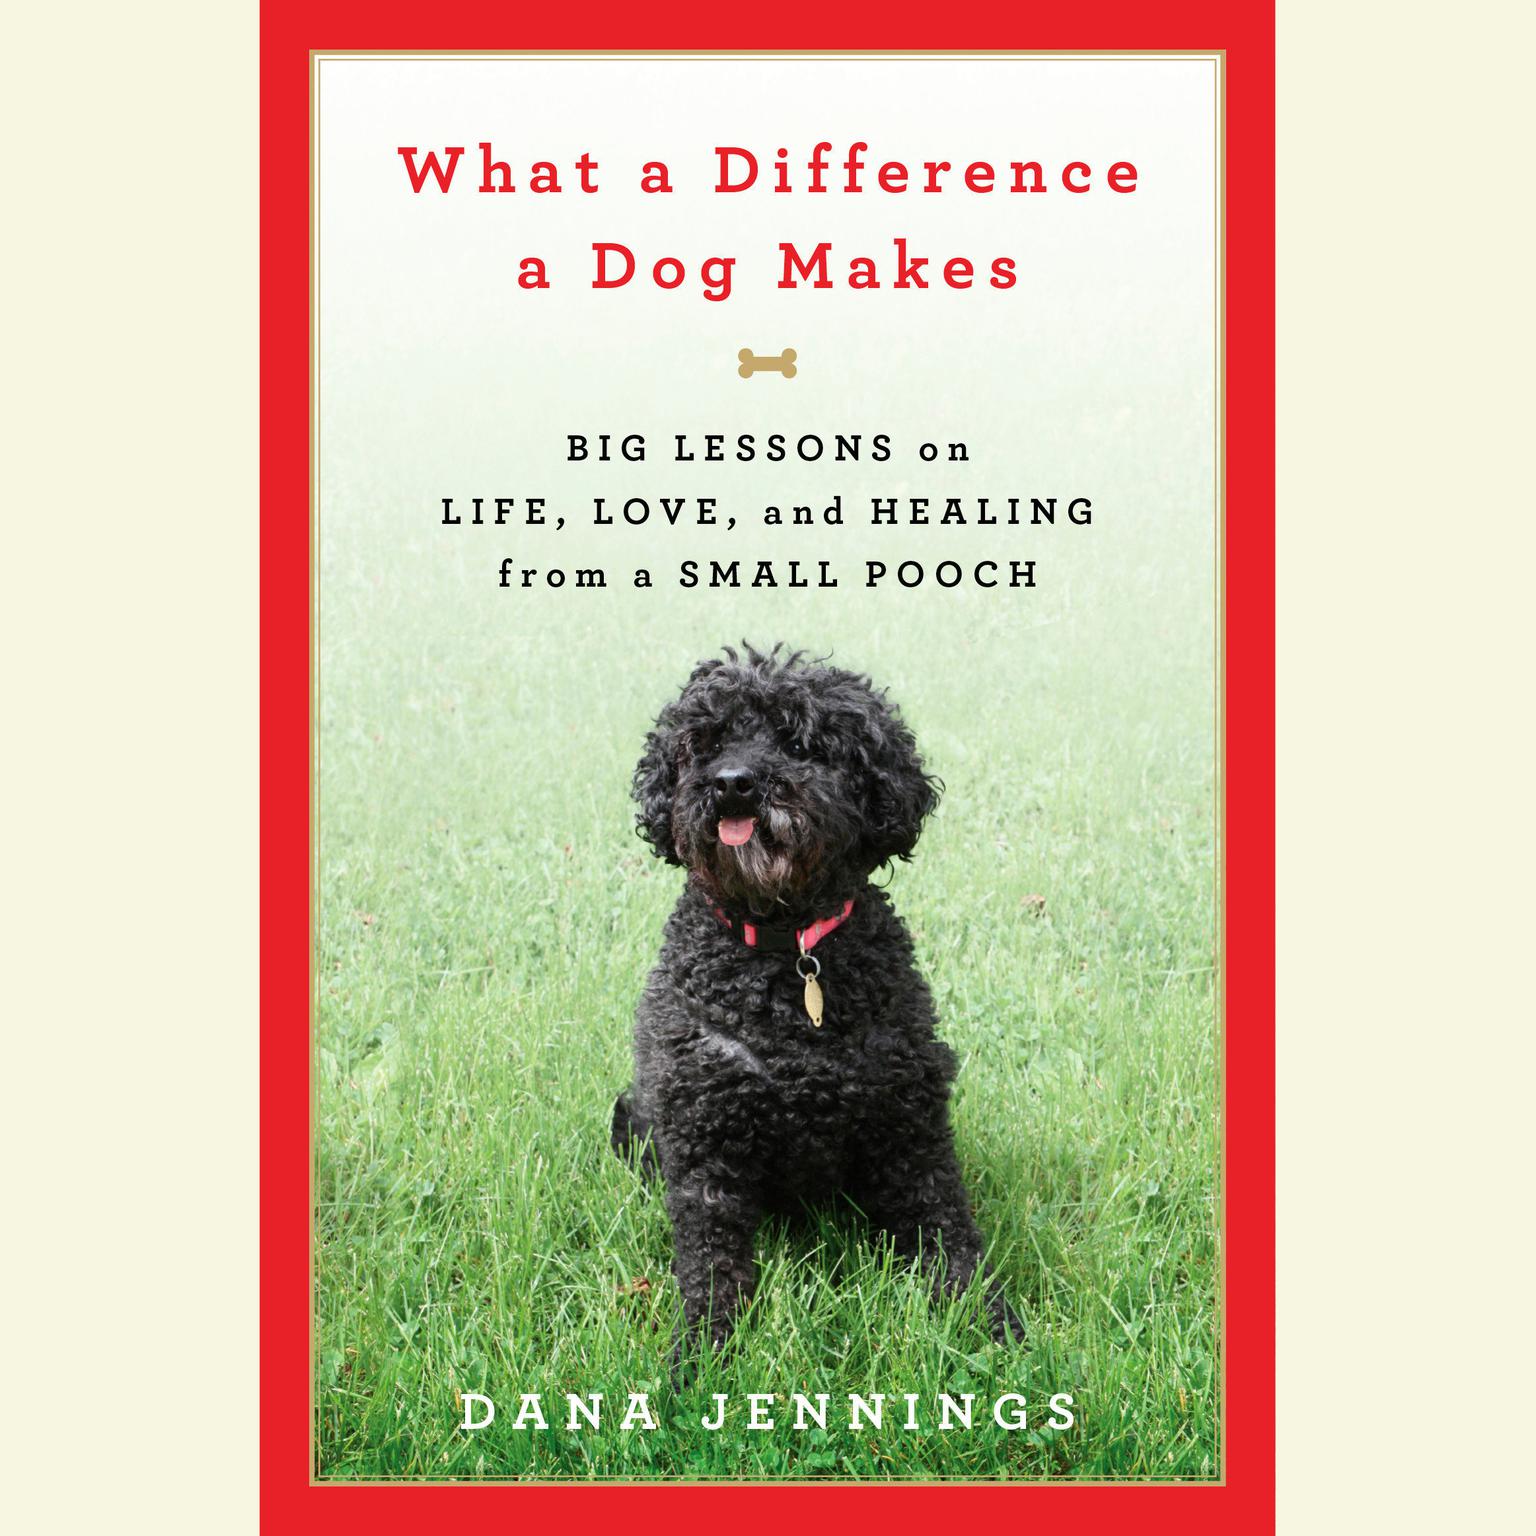 What a Difference a Dog Makes: Big Lessons on Life, Love and Healing from a Small Pooch Audiobook, by Dana Jennings